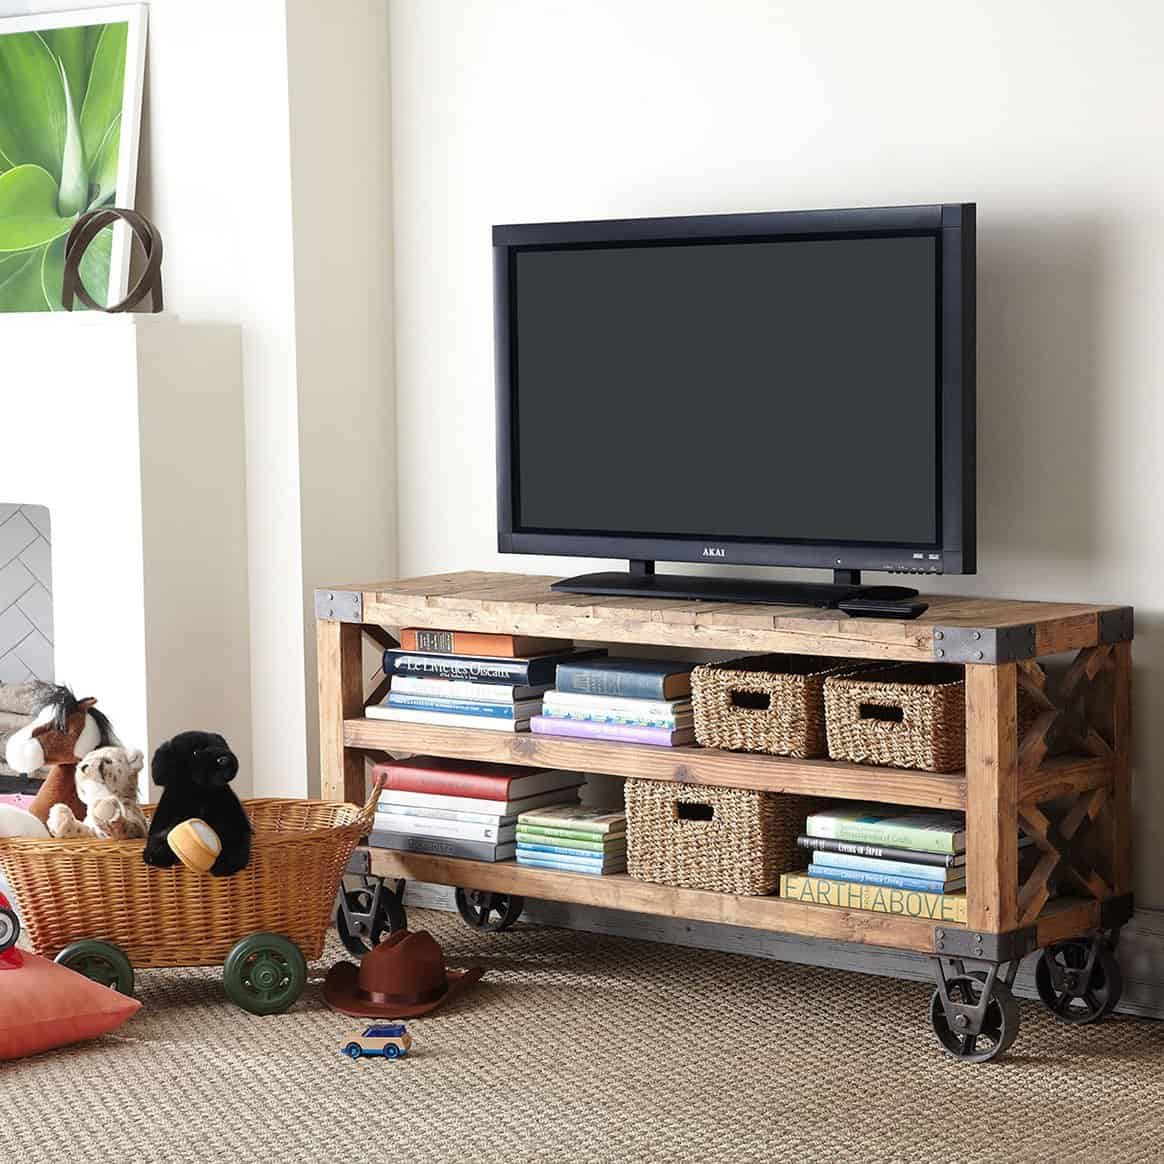 23 DIY TV Stand Ideas for Your Weekend Home Project